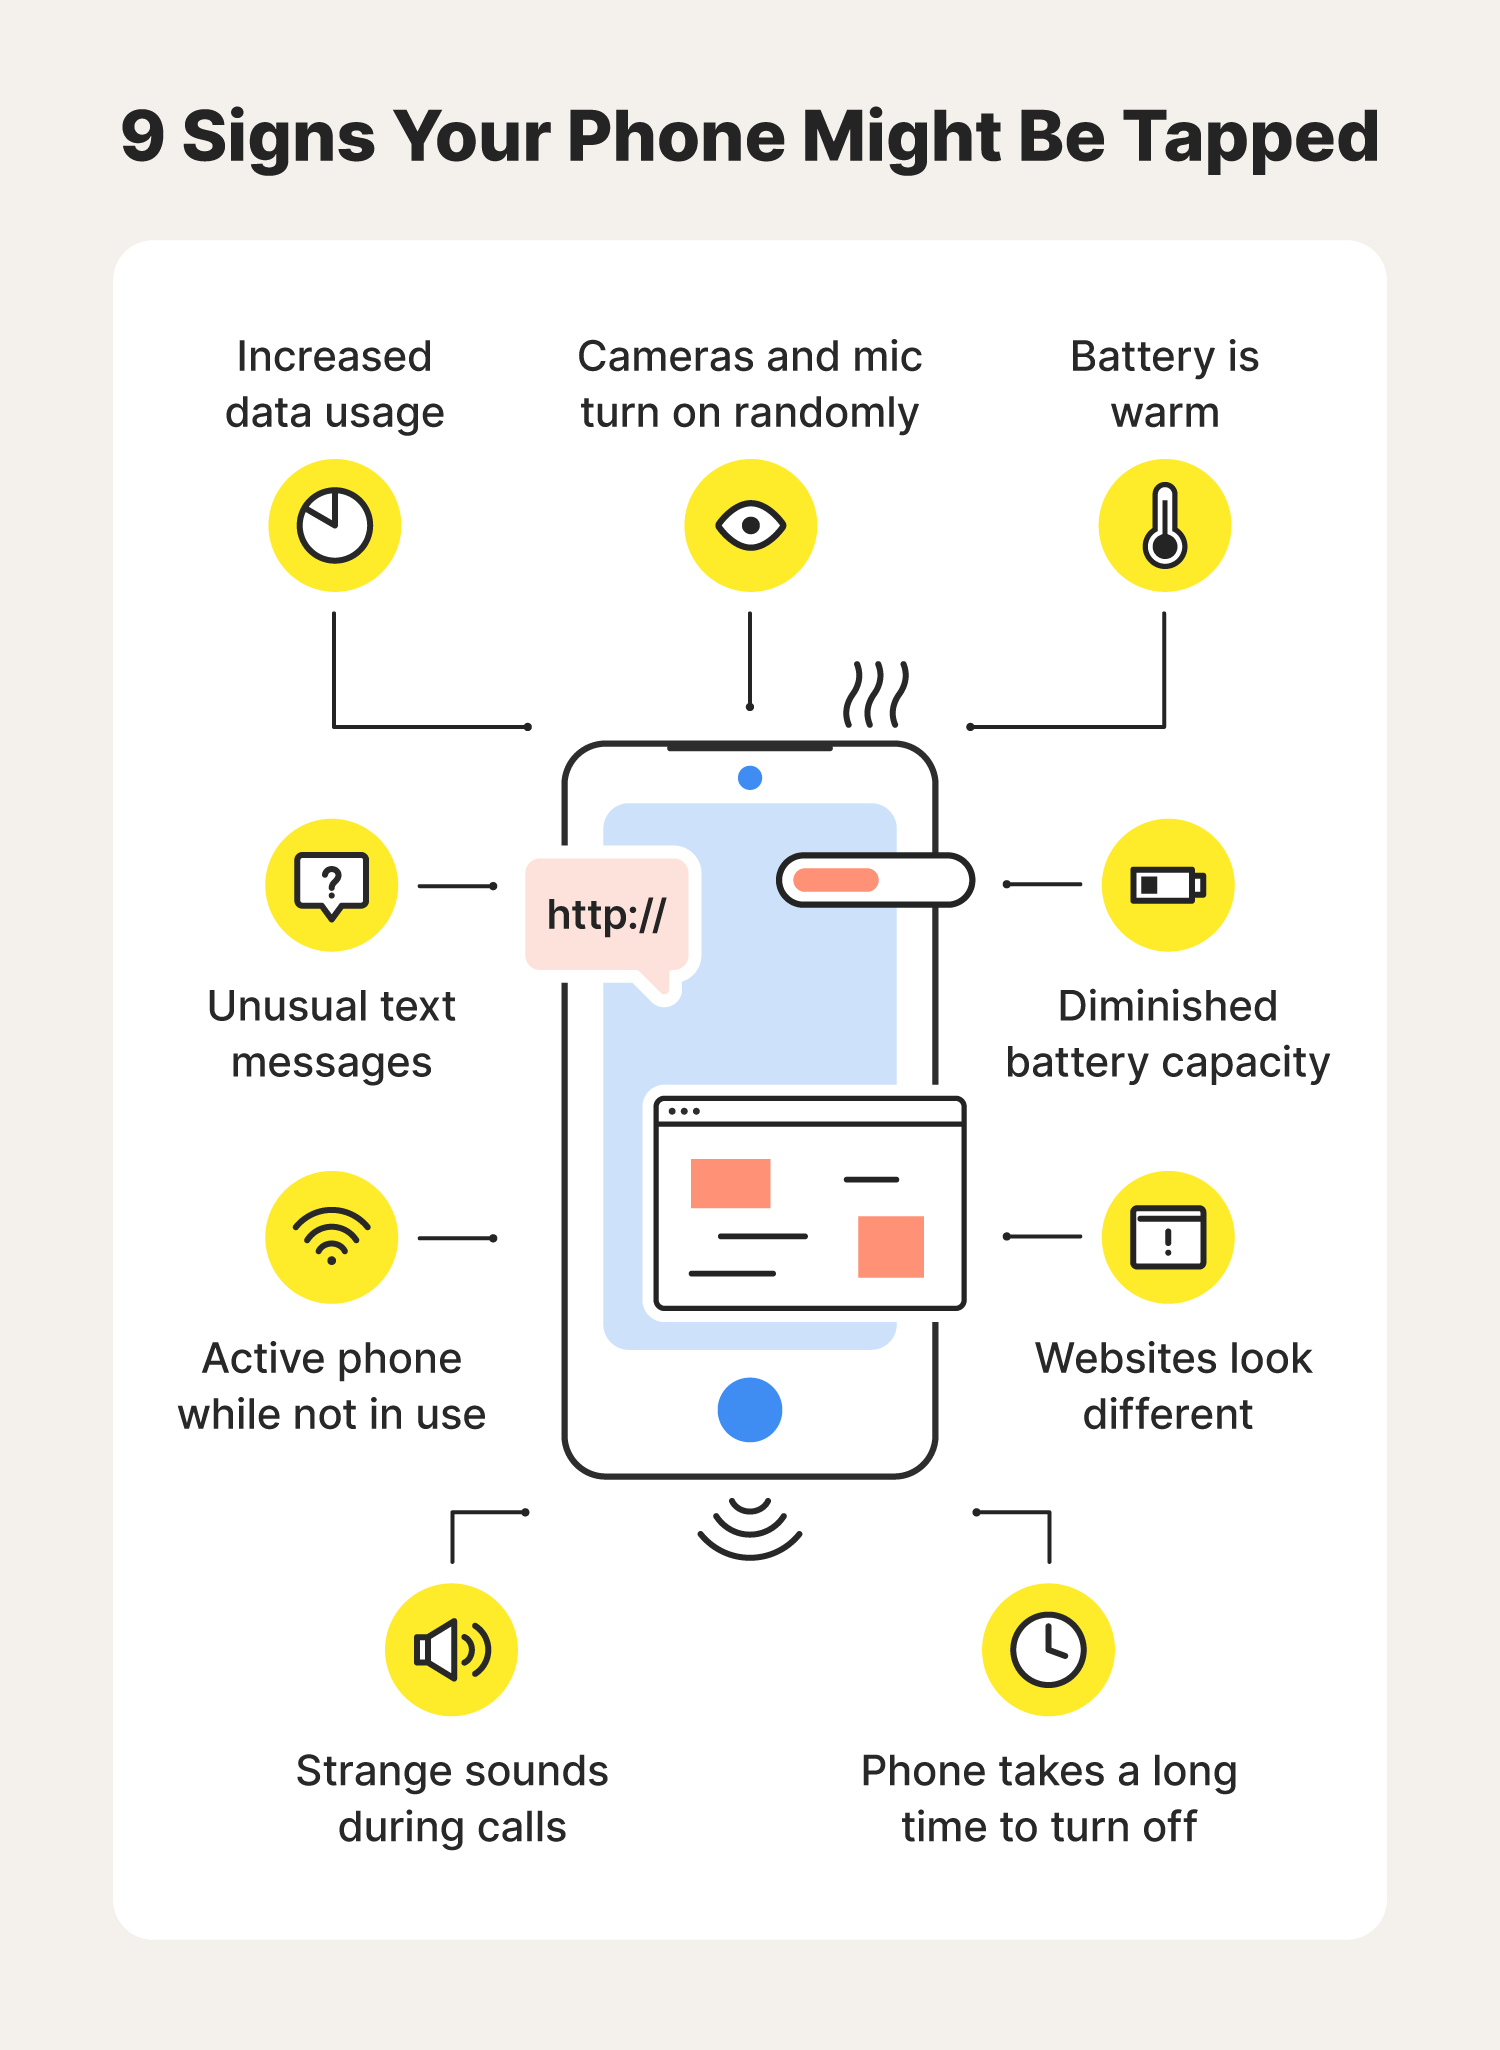 Illustrated chart showing 9 signs that your phone may be tapped.